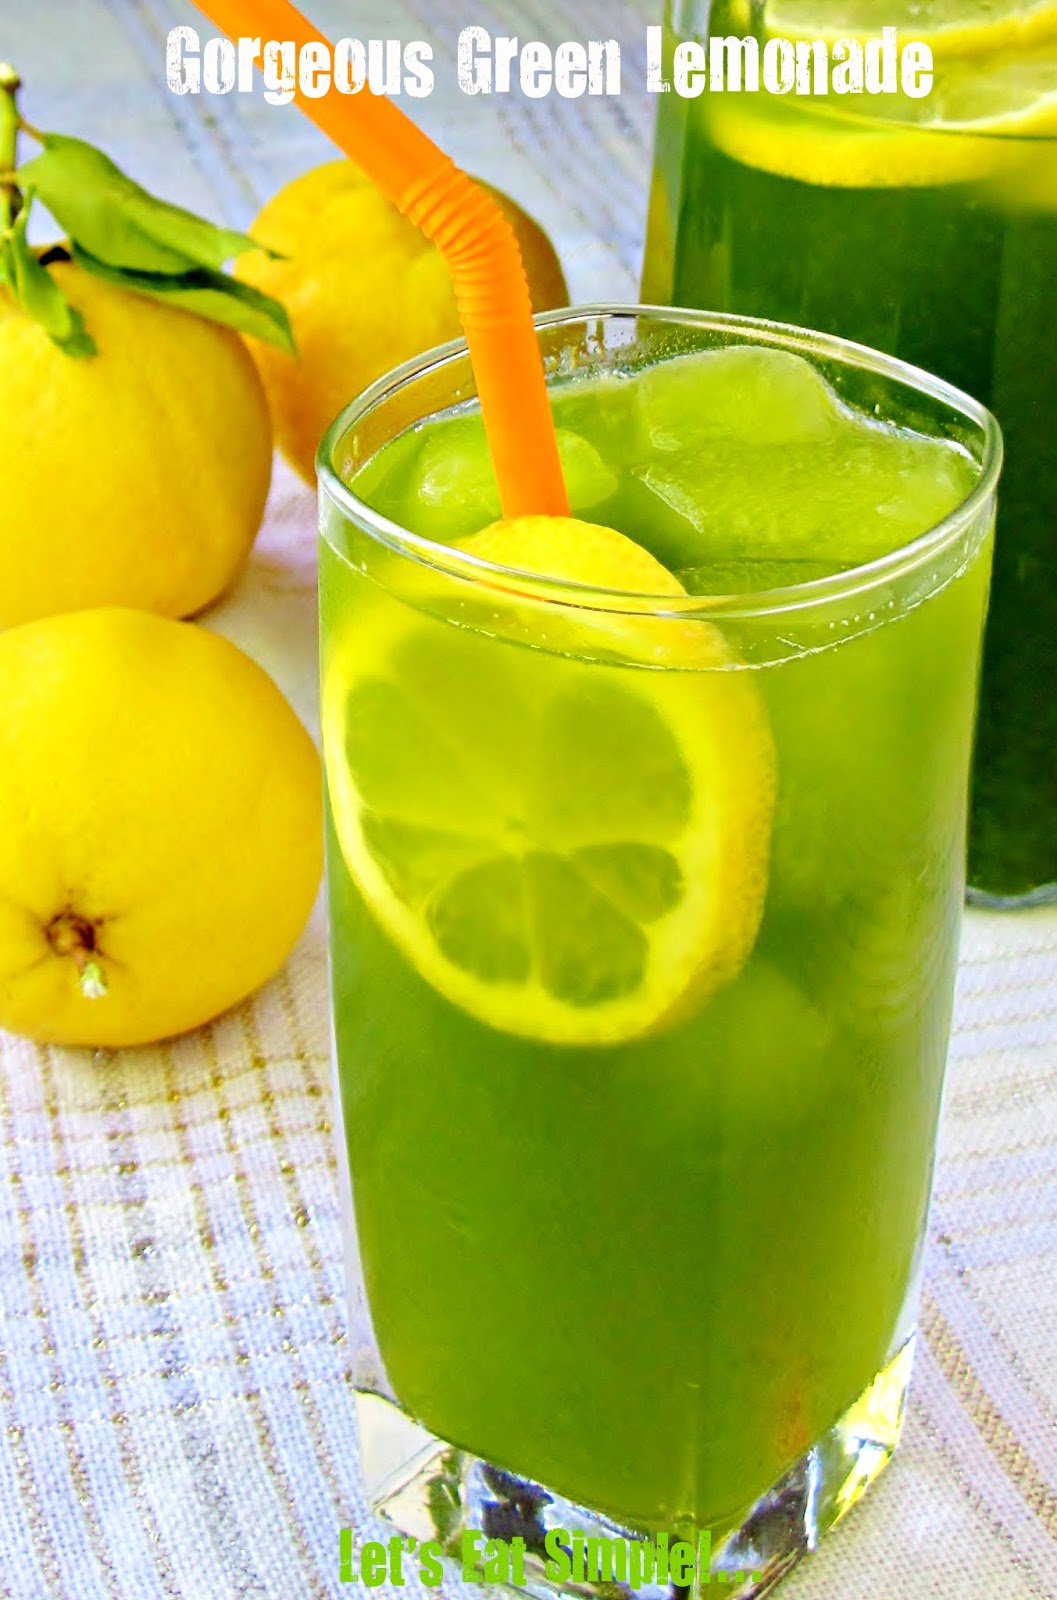 Let&amp;#39;s eat......simple!: Gorgeous Green Lemonade with Gingered Syrup